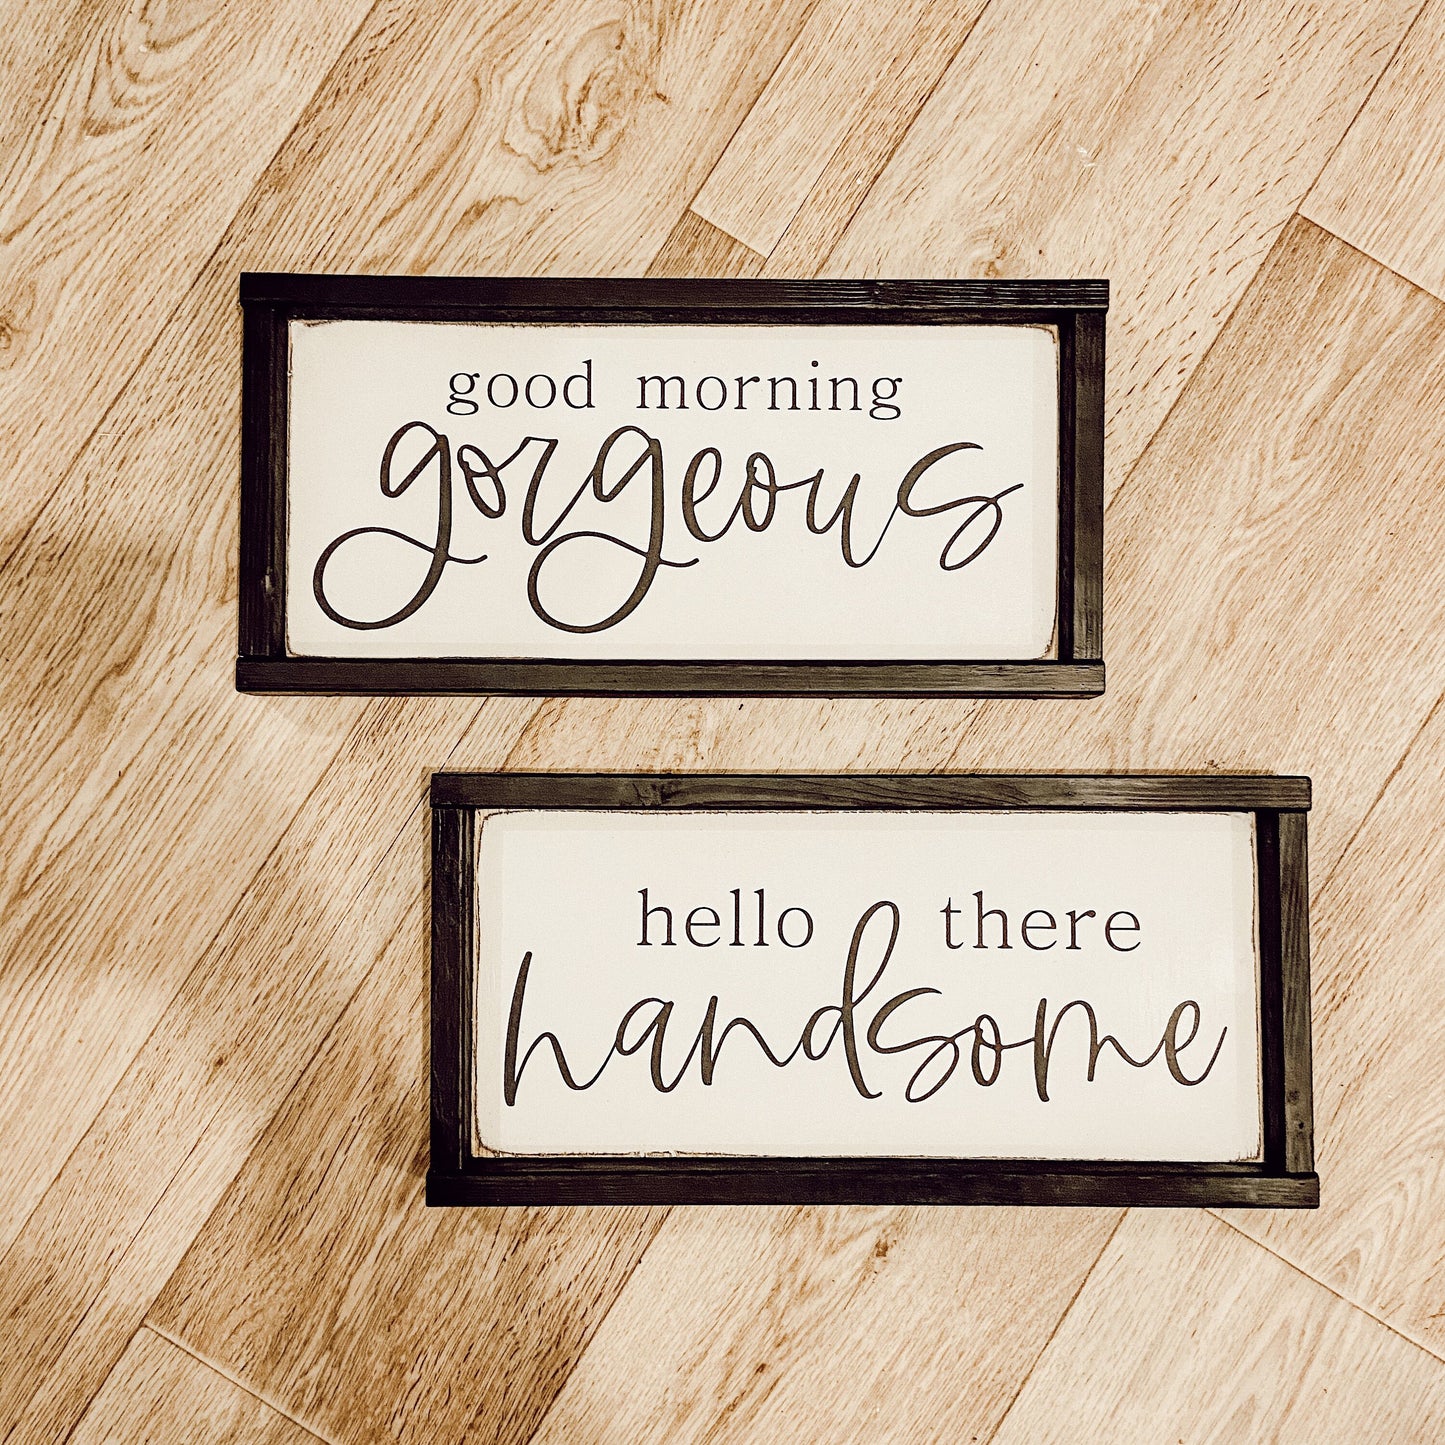 good morning gorgeous. hello there handsome. [FREE SHIPPING!]